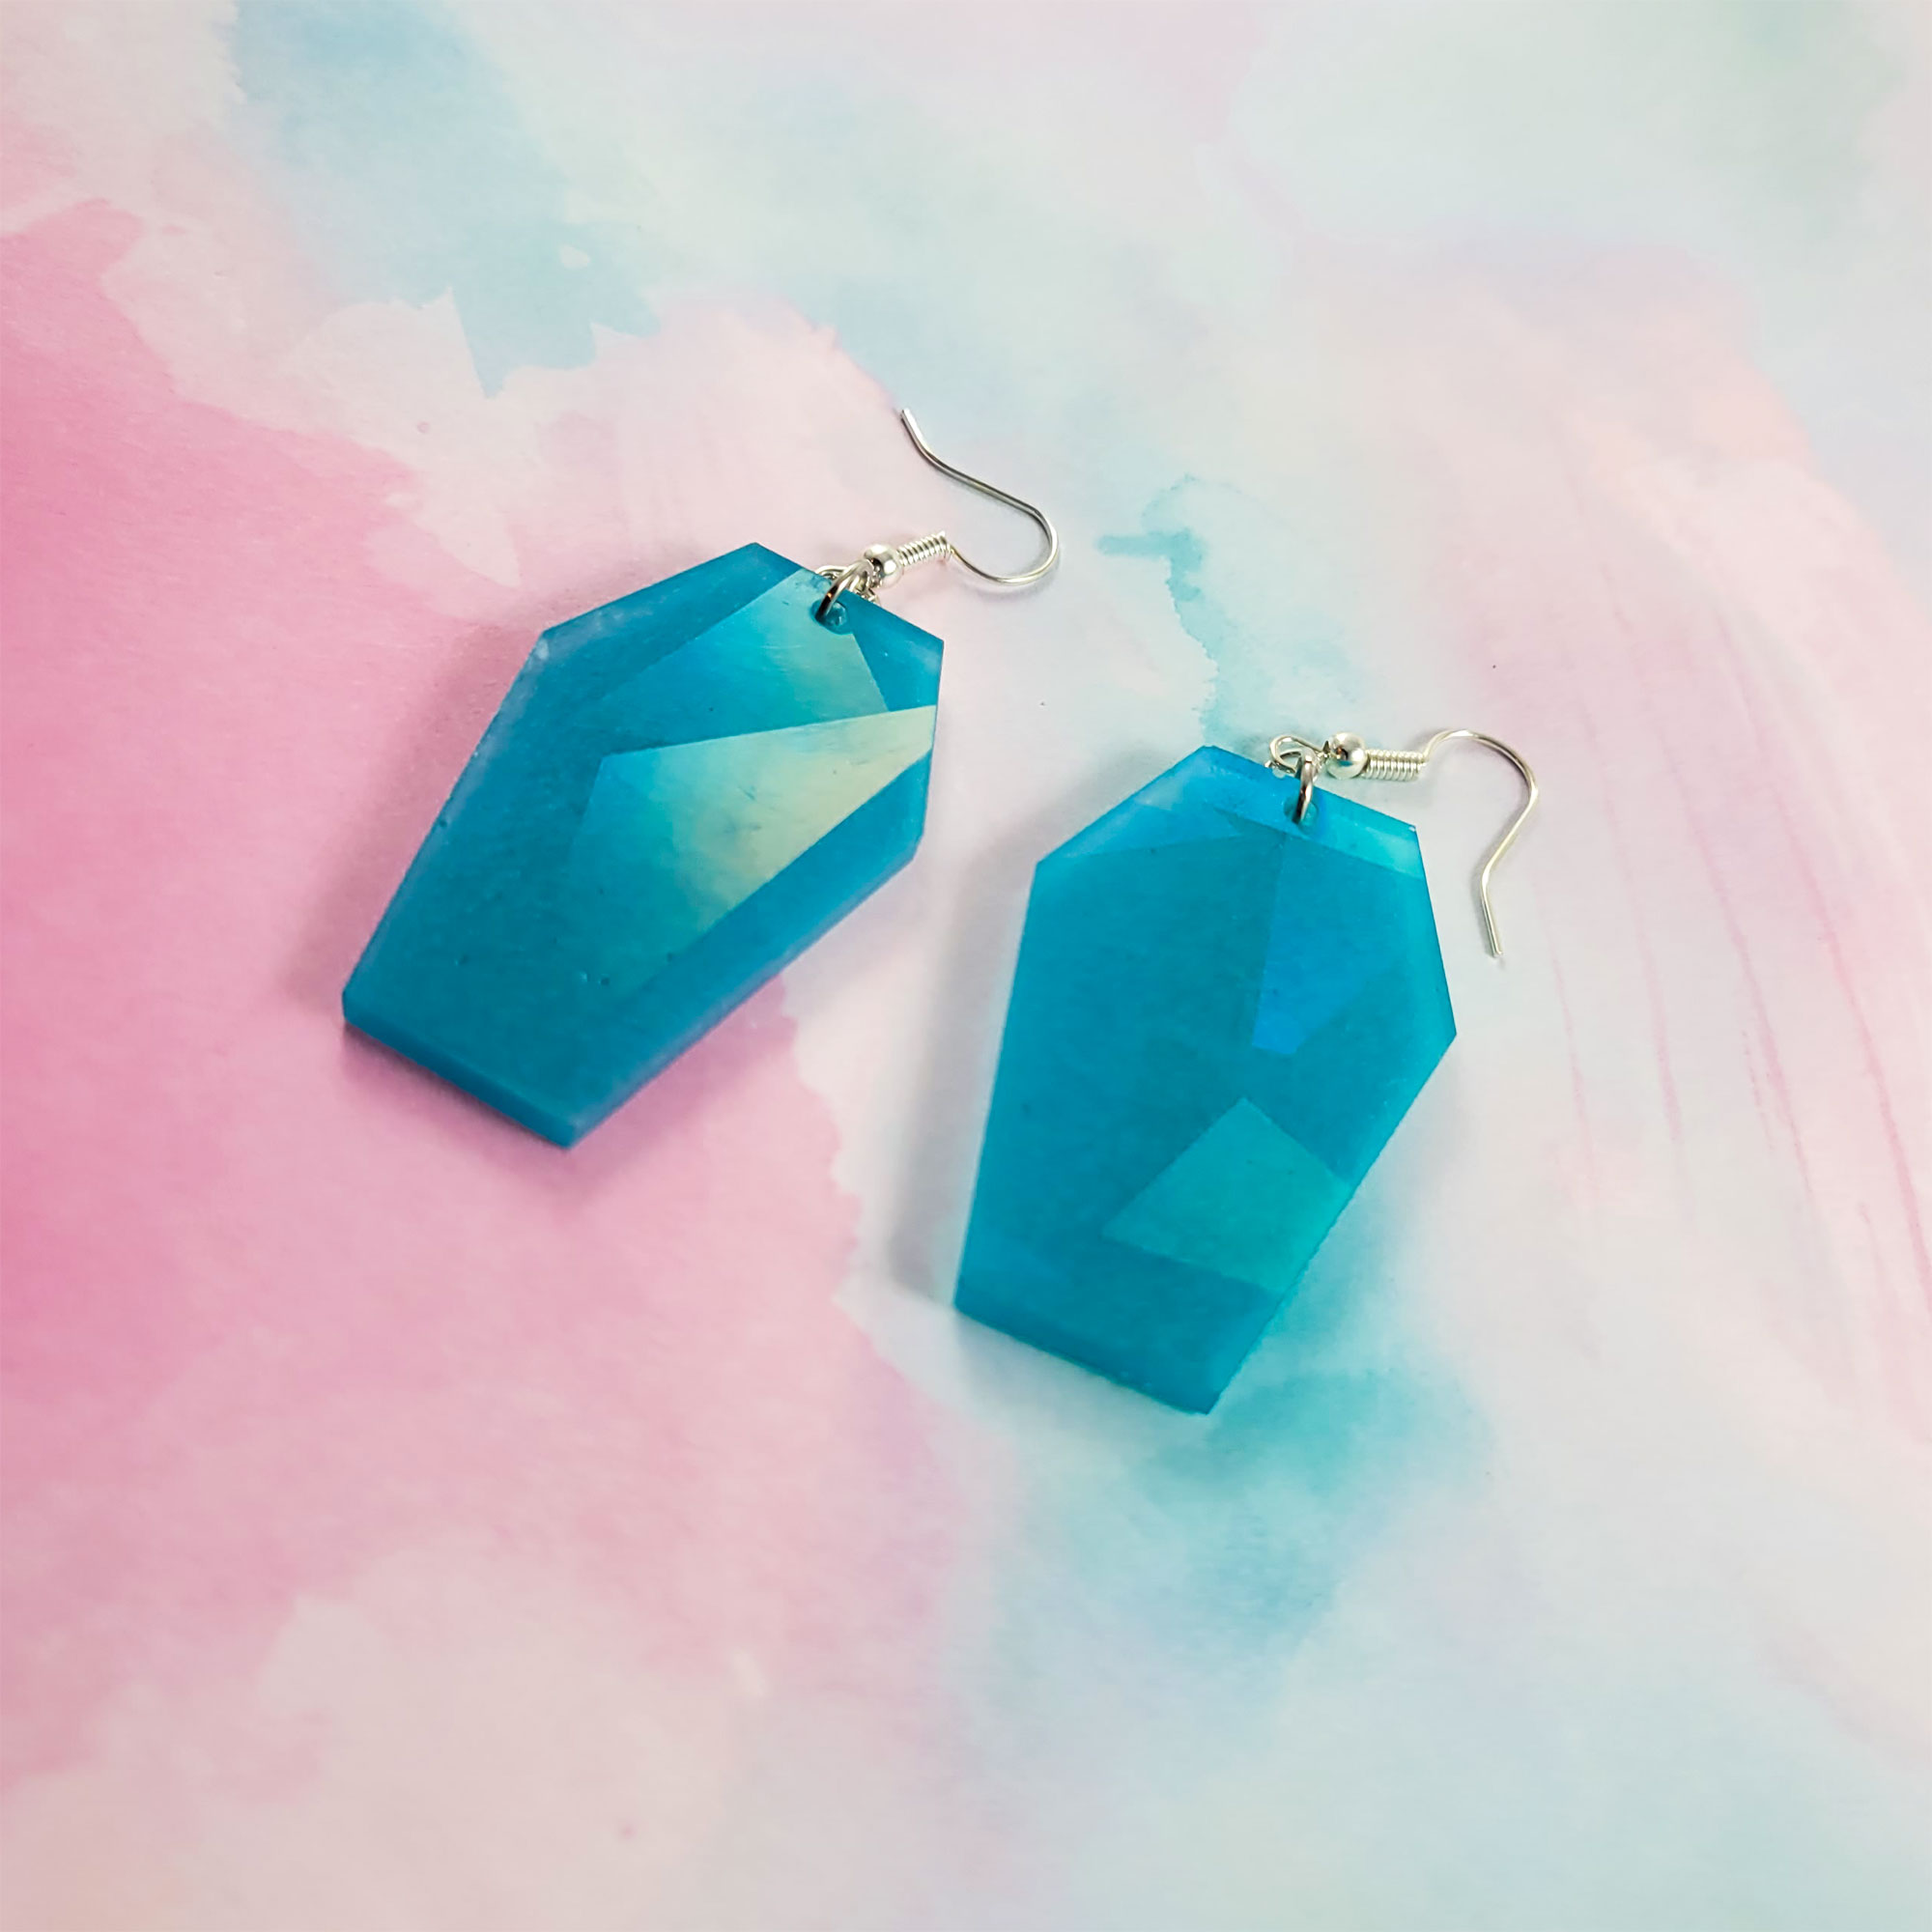 Teal Holographic Coffin Earrings by Wilde Designs